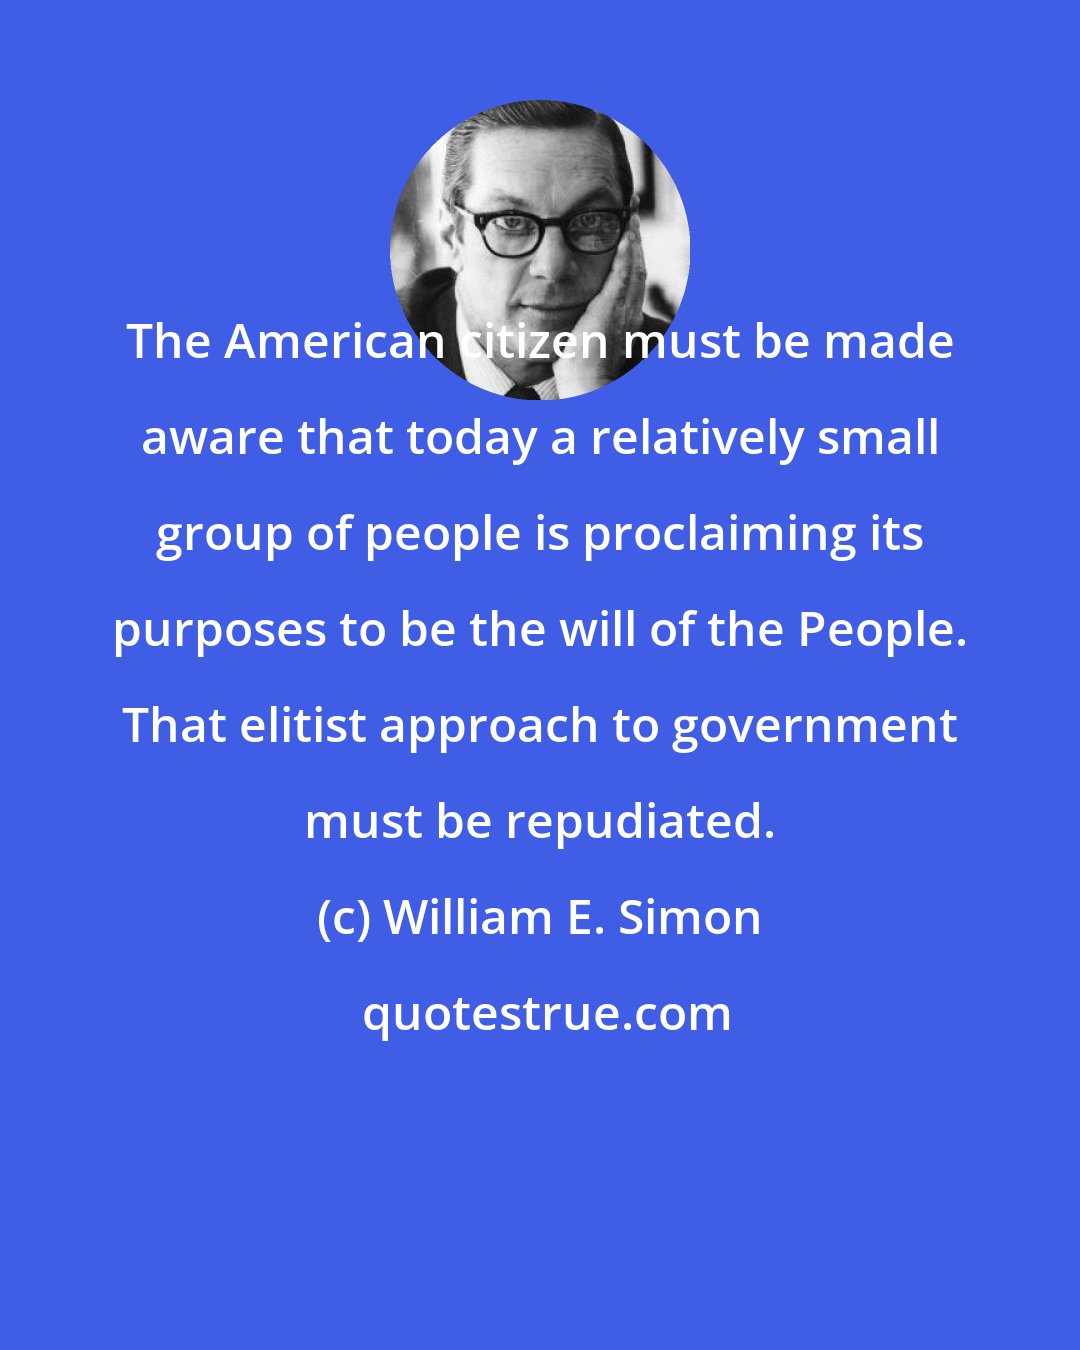 William E. Simon: The American citizen must be made aware that today a relatively small group of people is proclaiming its purposes to be the will of the People. That elitist approach to government must be repudiated.